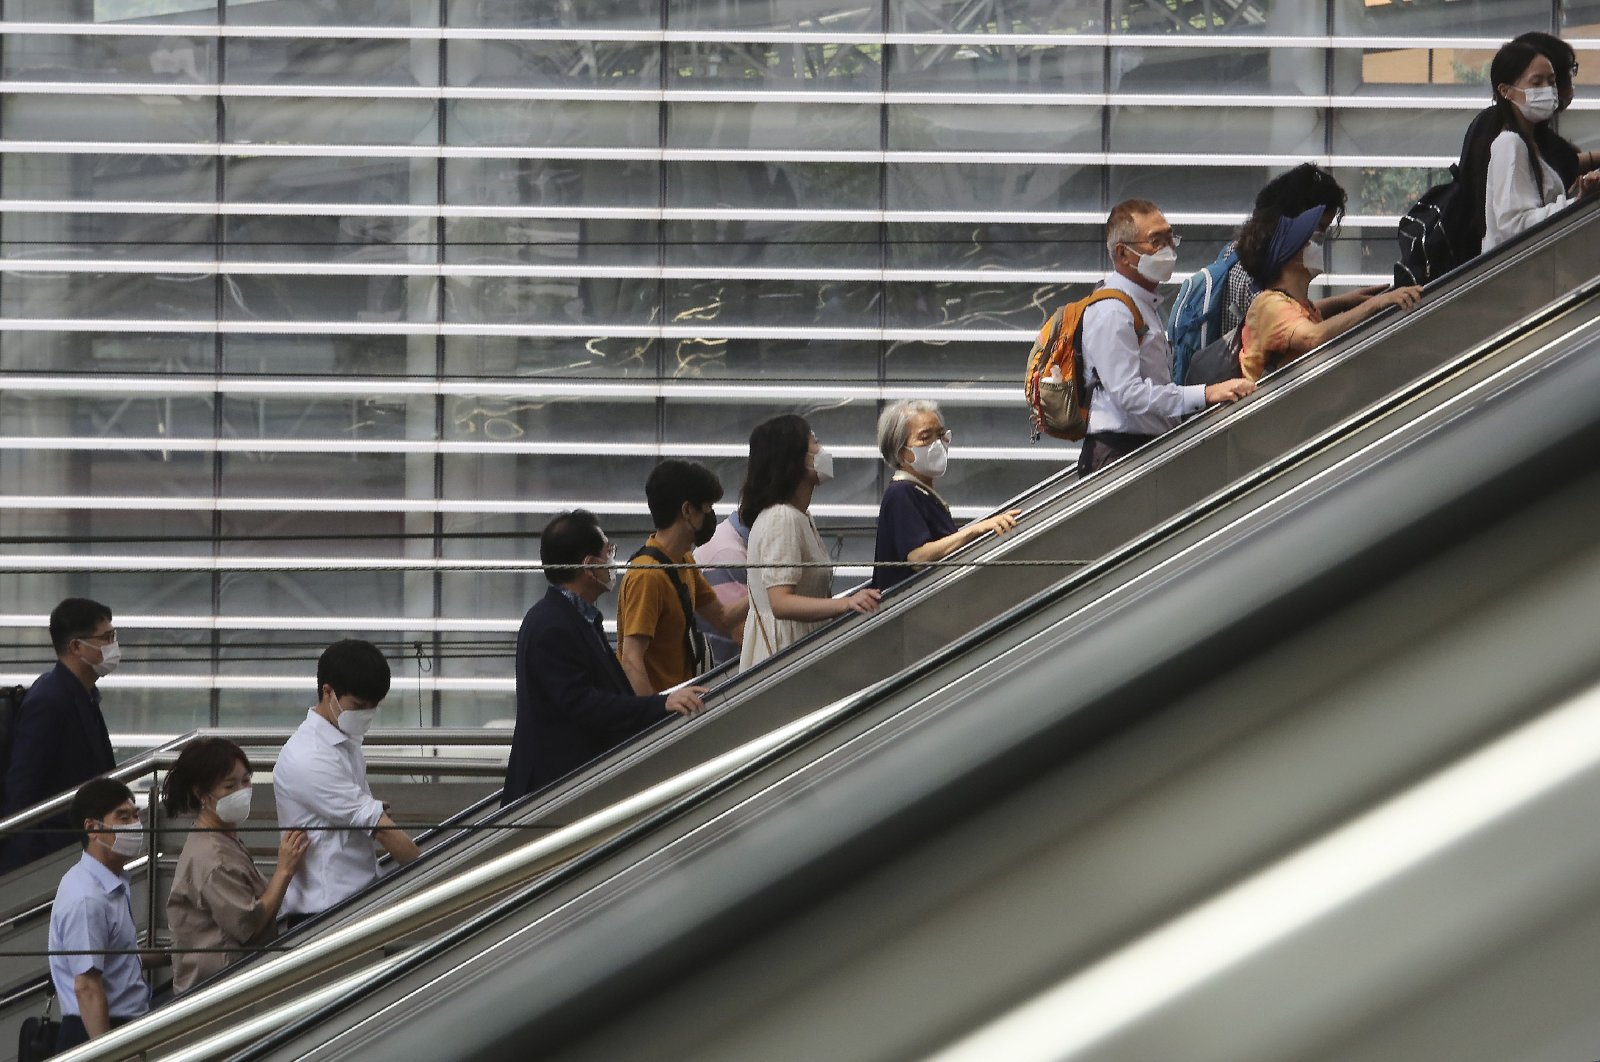 People wearing face masks to help protect against the spread of the coronavirus ride an escalator as they arrive at the Seoul Railway Station in Seoul, South Korea, Aug. 24, 2020. (AP Photo)